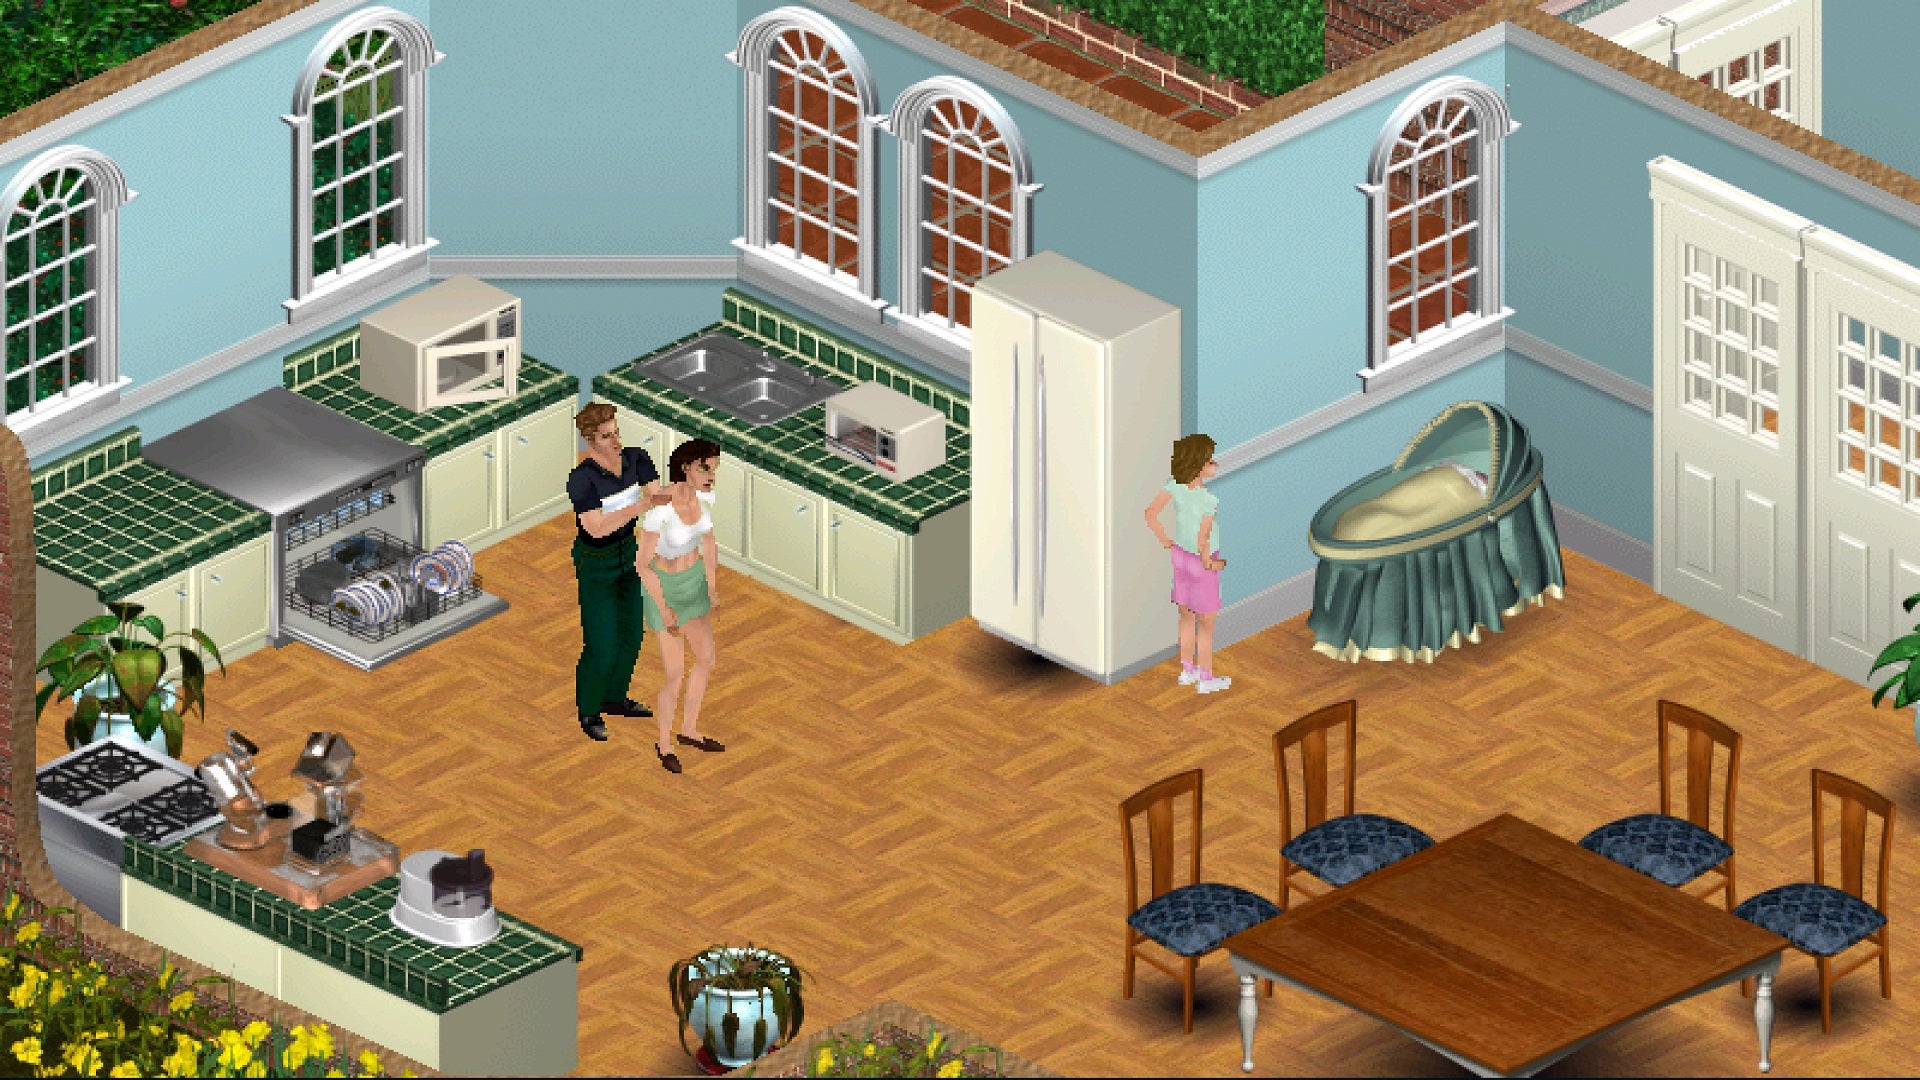 A presskit image from 2000's original The Sims. It shows the kitchen/dining room of a suburban middle-class family of the era: a husband gives his wife a massage in the kitchen, while their young daughter looks at a baby in a crib in the corner.